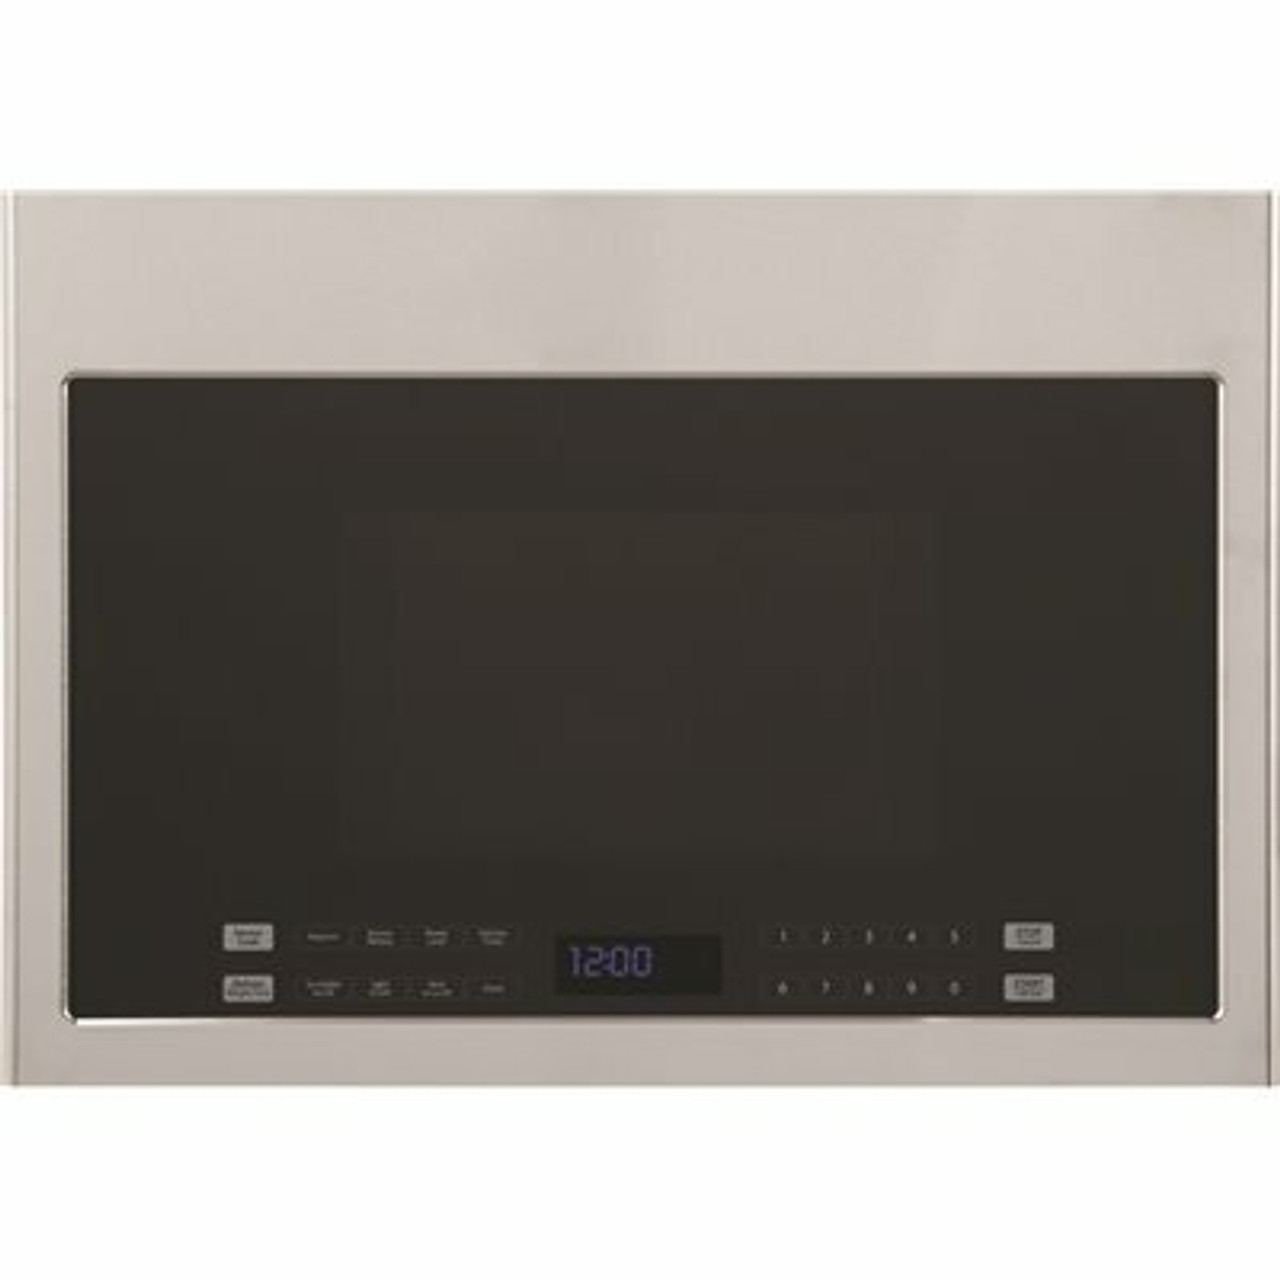 Haier 24 In. 1.4 Cu. Ft. Over The Range Microwave In Stainless Steel